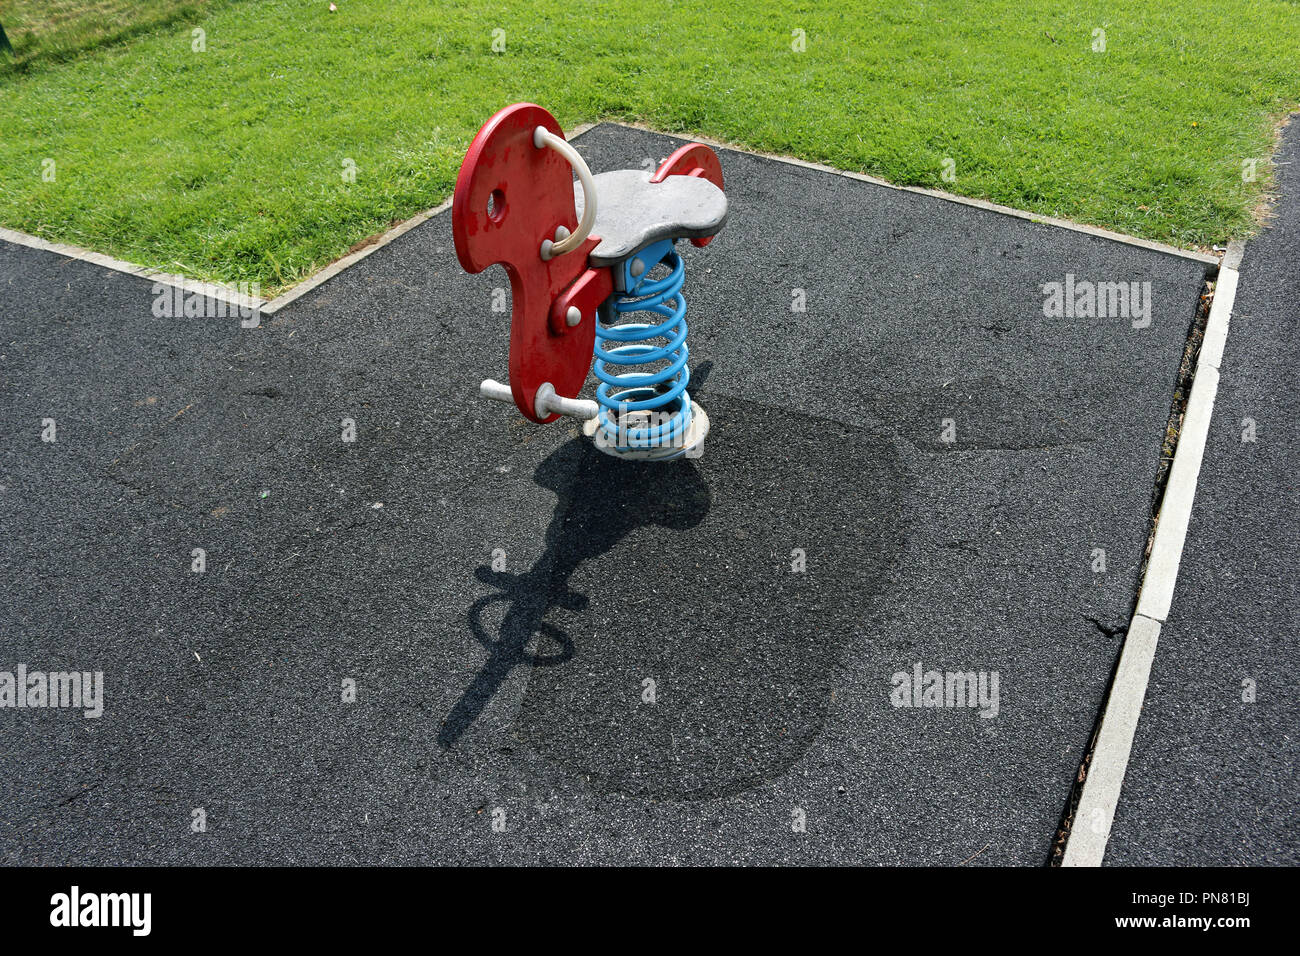 Red rocking bird piece of play equipment on a blue spring surrounded by a rubber crumb safety surface which has been repaired in several places and is Stock Photo